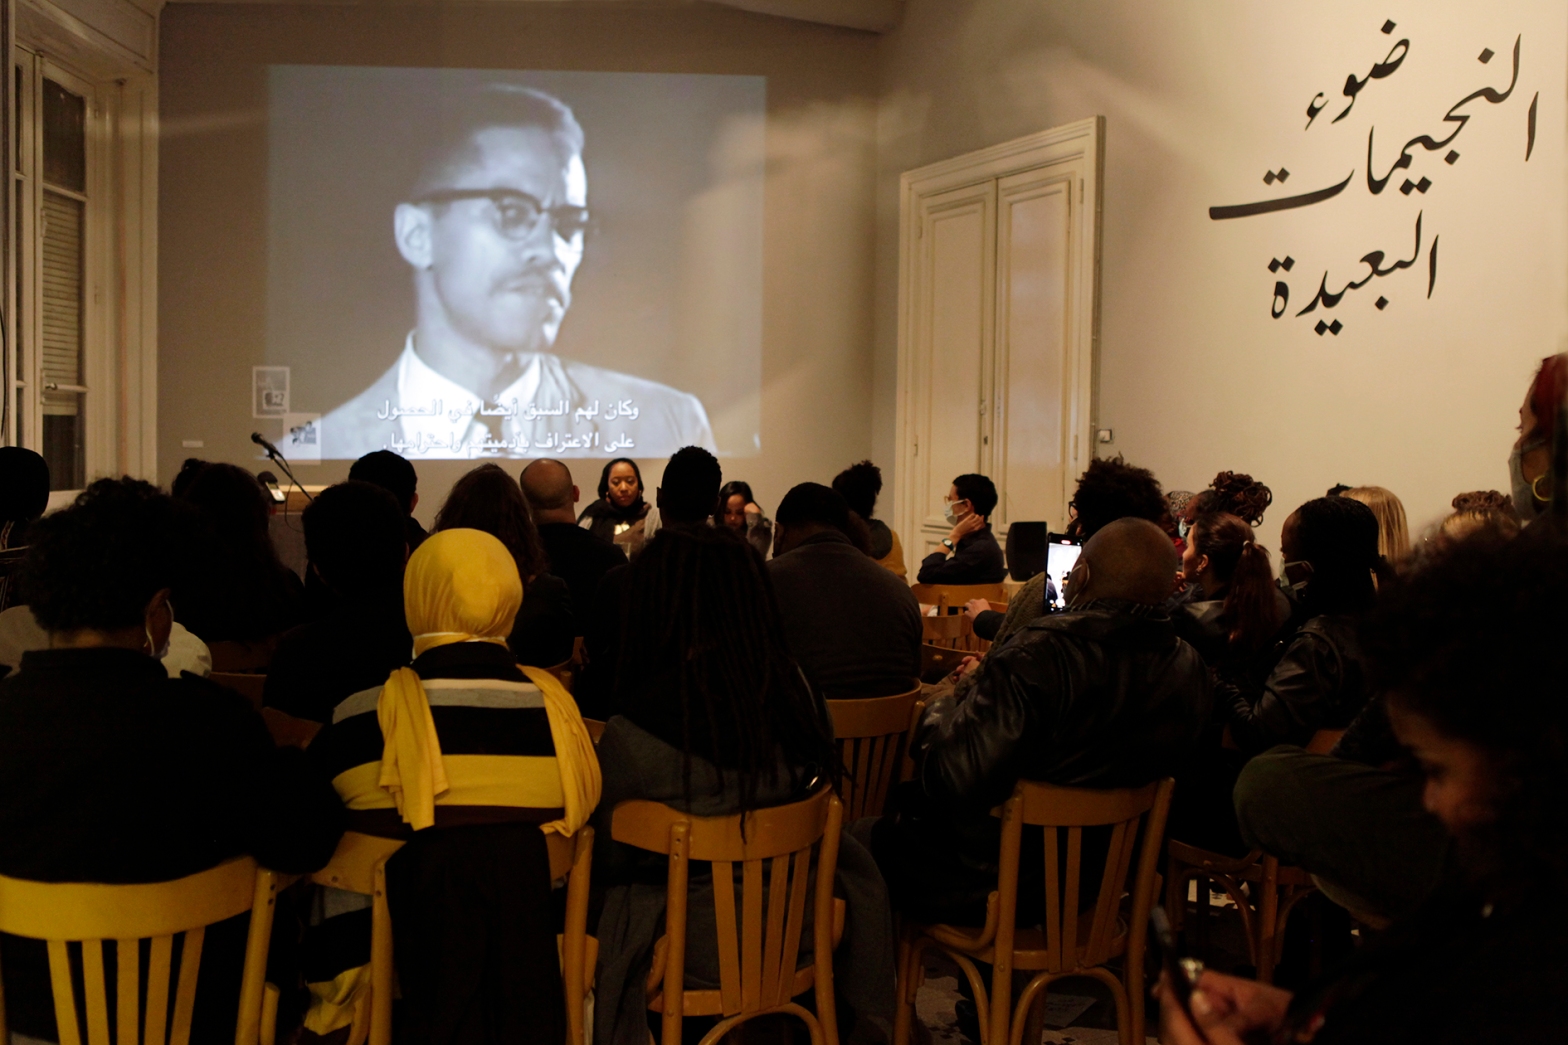 Projection of Malcom X on wall, artist Nsenga Knight and Translator Samah Gafar in from of audience of Cairenes at the COntemporary Image Collective in Cairo Egypt. Nsenga Knight performs her X Speaks performance art and social practice work